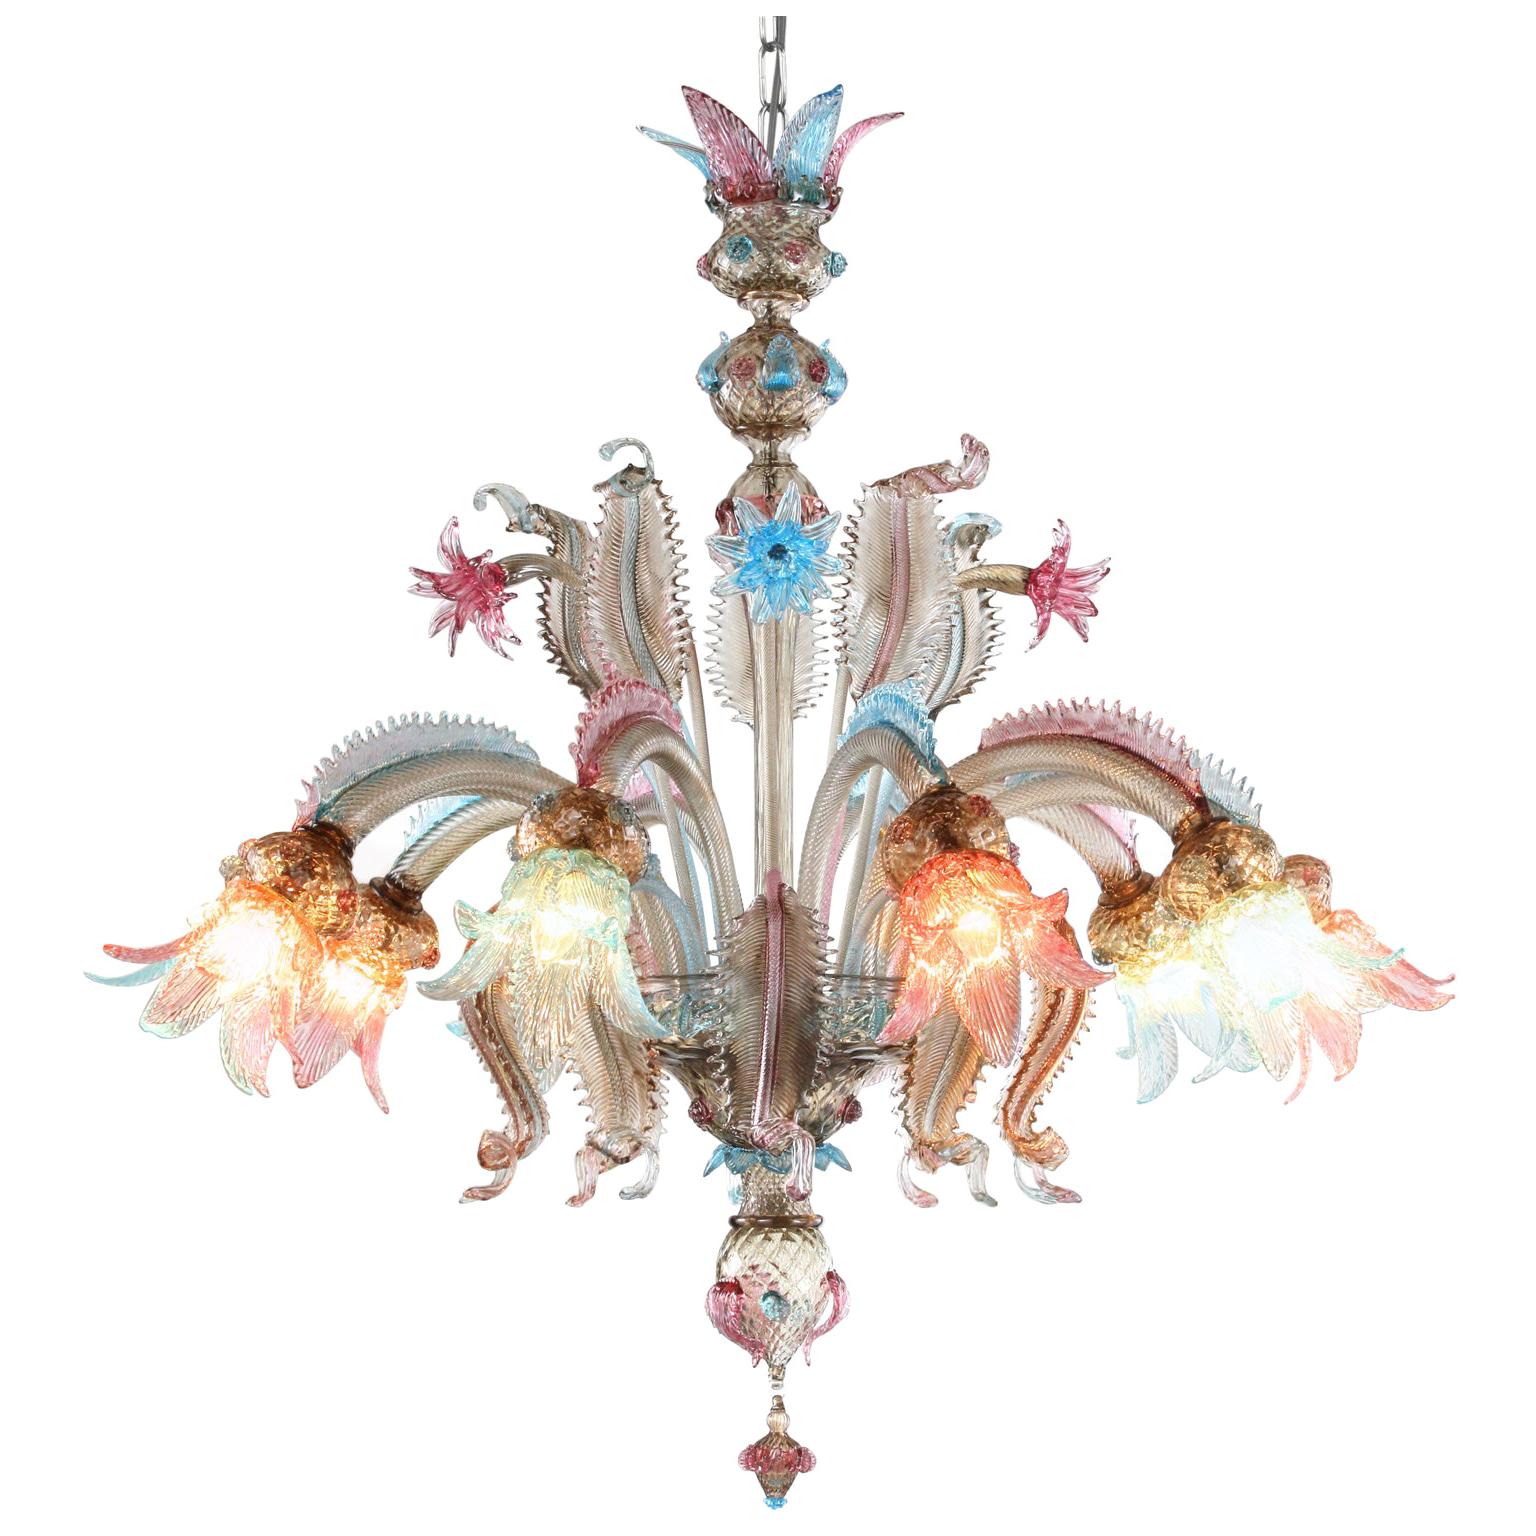 The Classic Murano glass chandelier, as it is in the collective imagery. Just like the other chandeliers in our collections, it is designed with attention to details and passion. Each product (from monumental chandeliers to smaller pieces) is unique